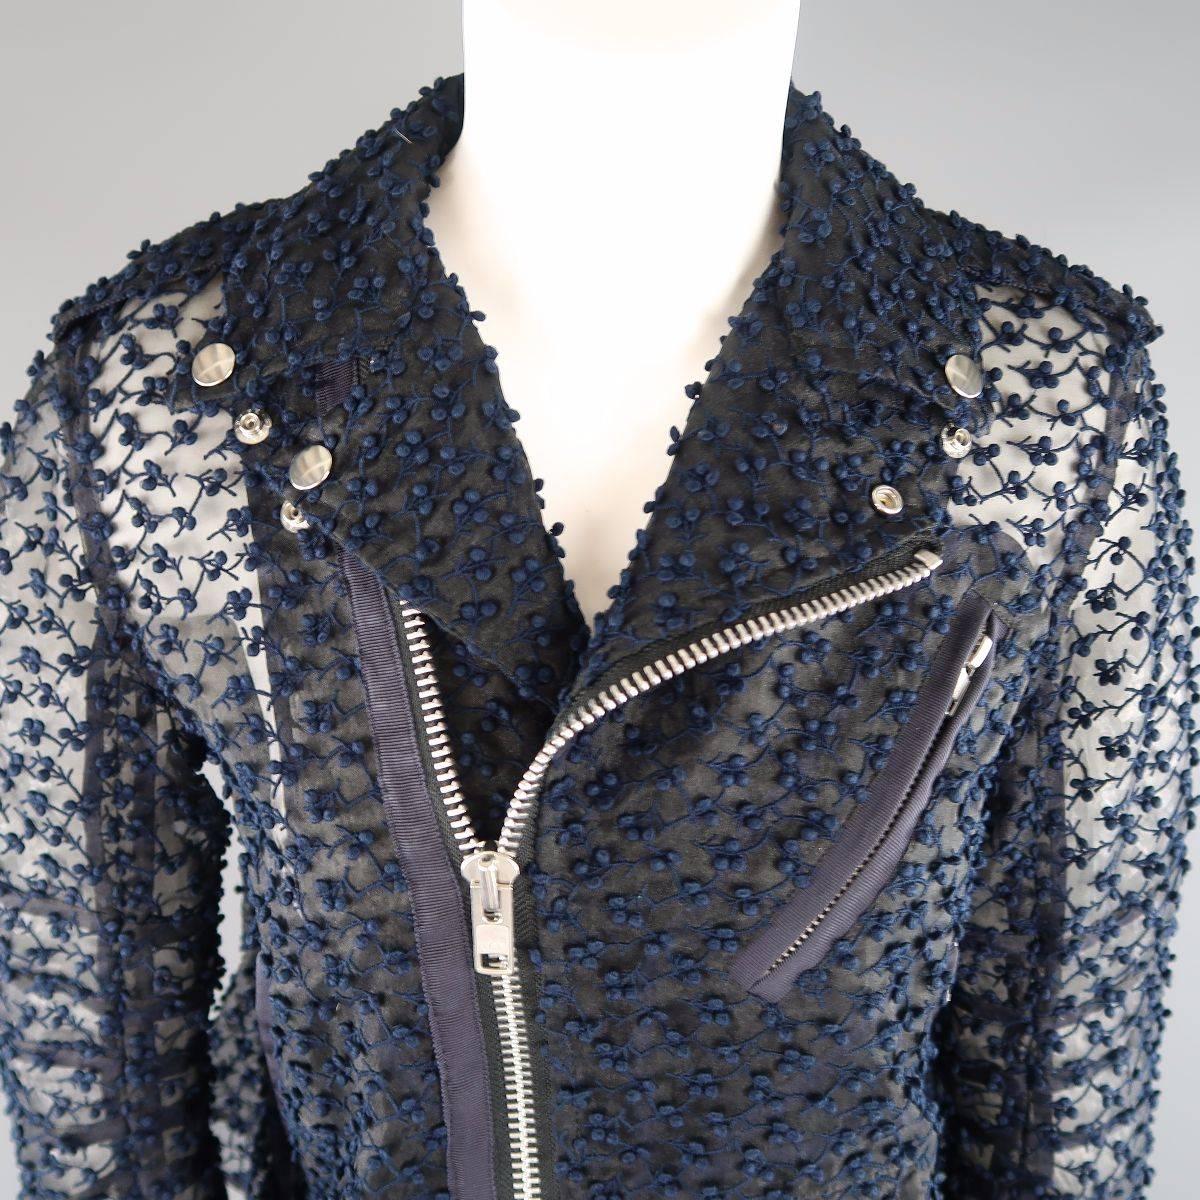 This gorgeous SACAI biker jacket comes in a textured, embroidered sheer navy blue tafeta material and features a pointed lapel with silver tone snaps, asymmetrical zip closure, faille piping, belted front, zip cuffs, and a ruffle pleated back. Made